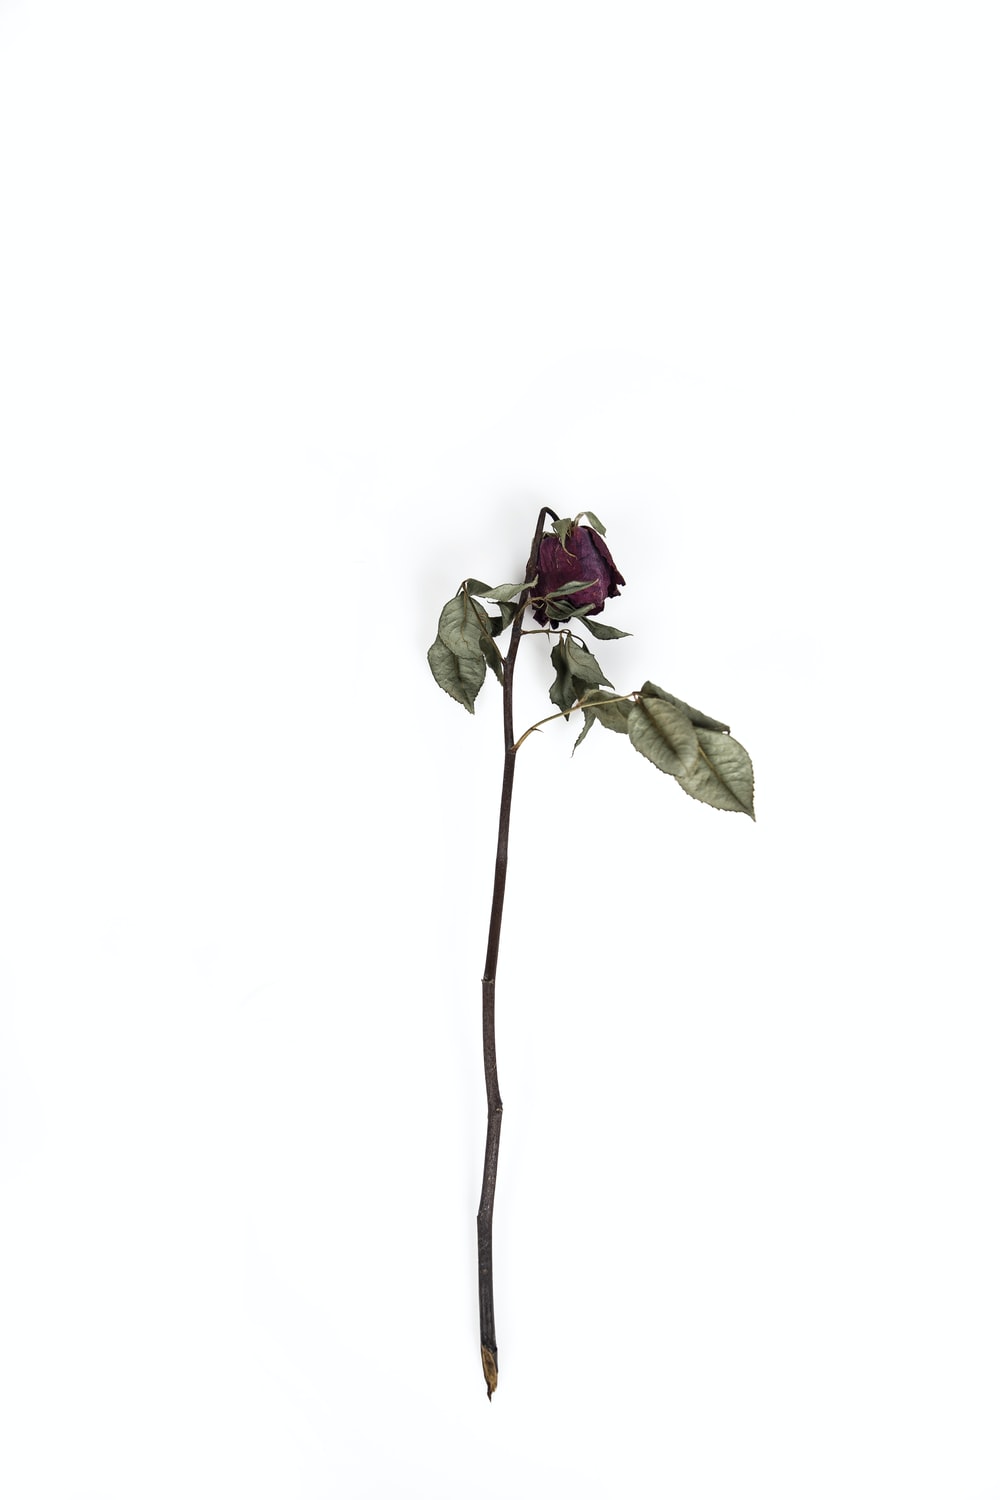 Dead Rose Picture. Download Free Image